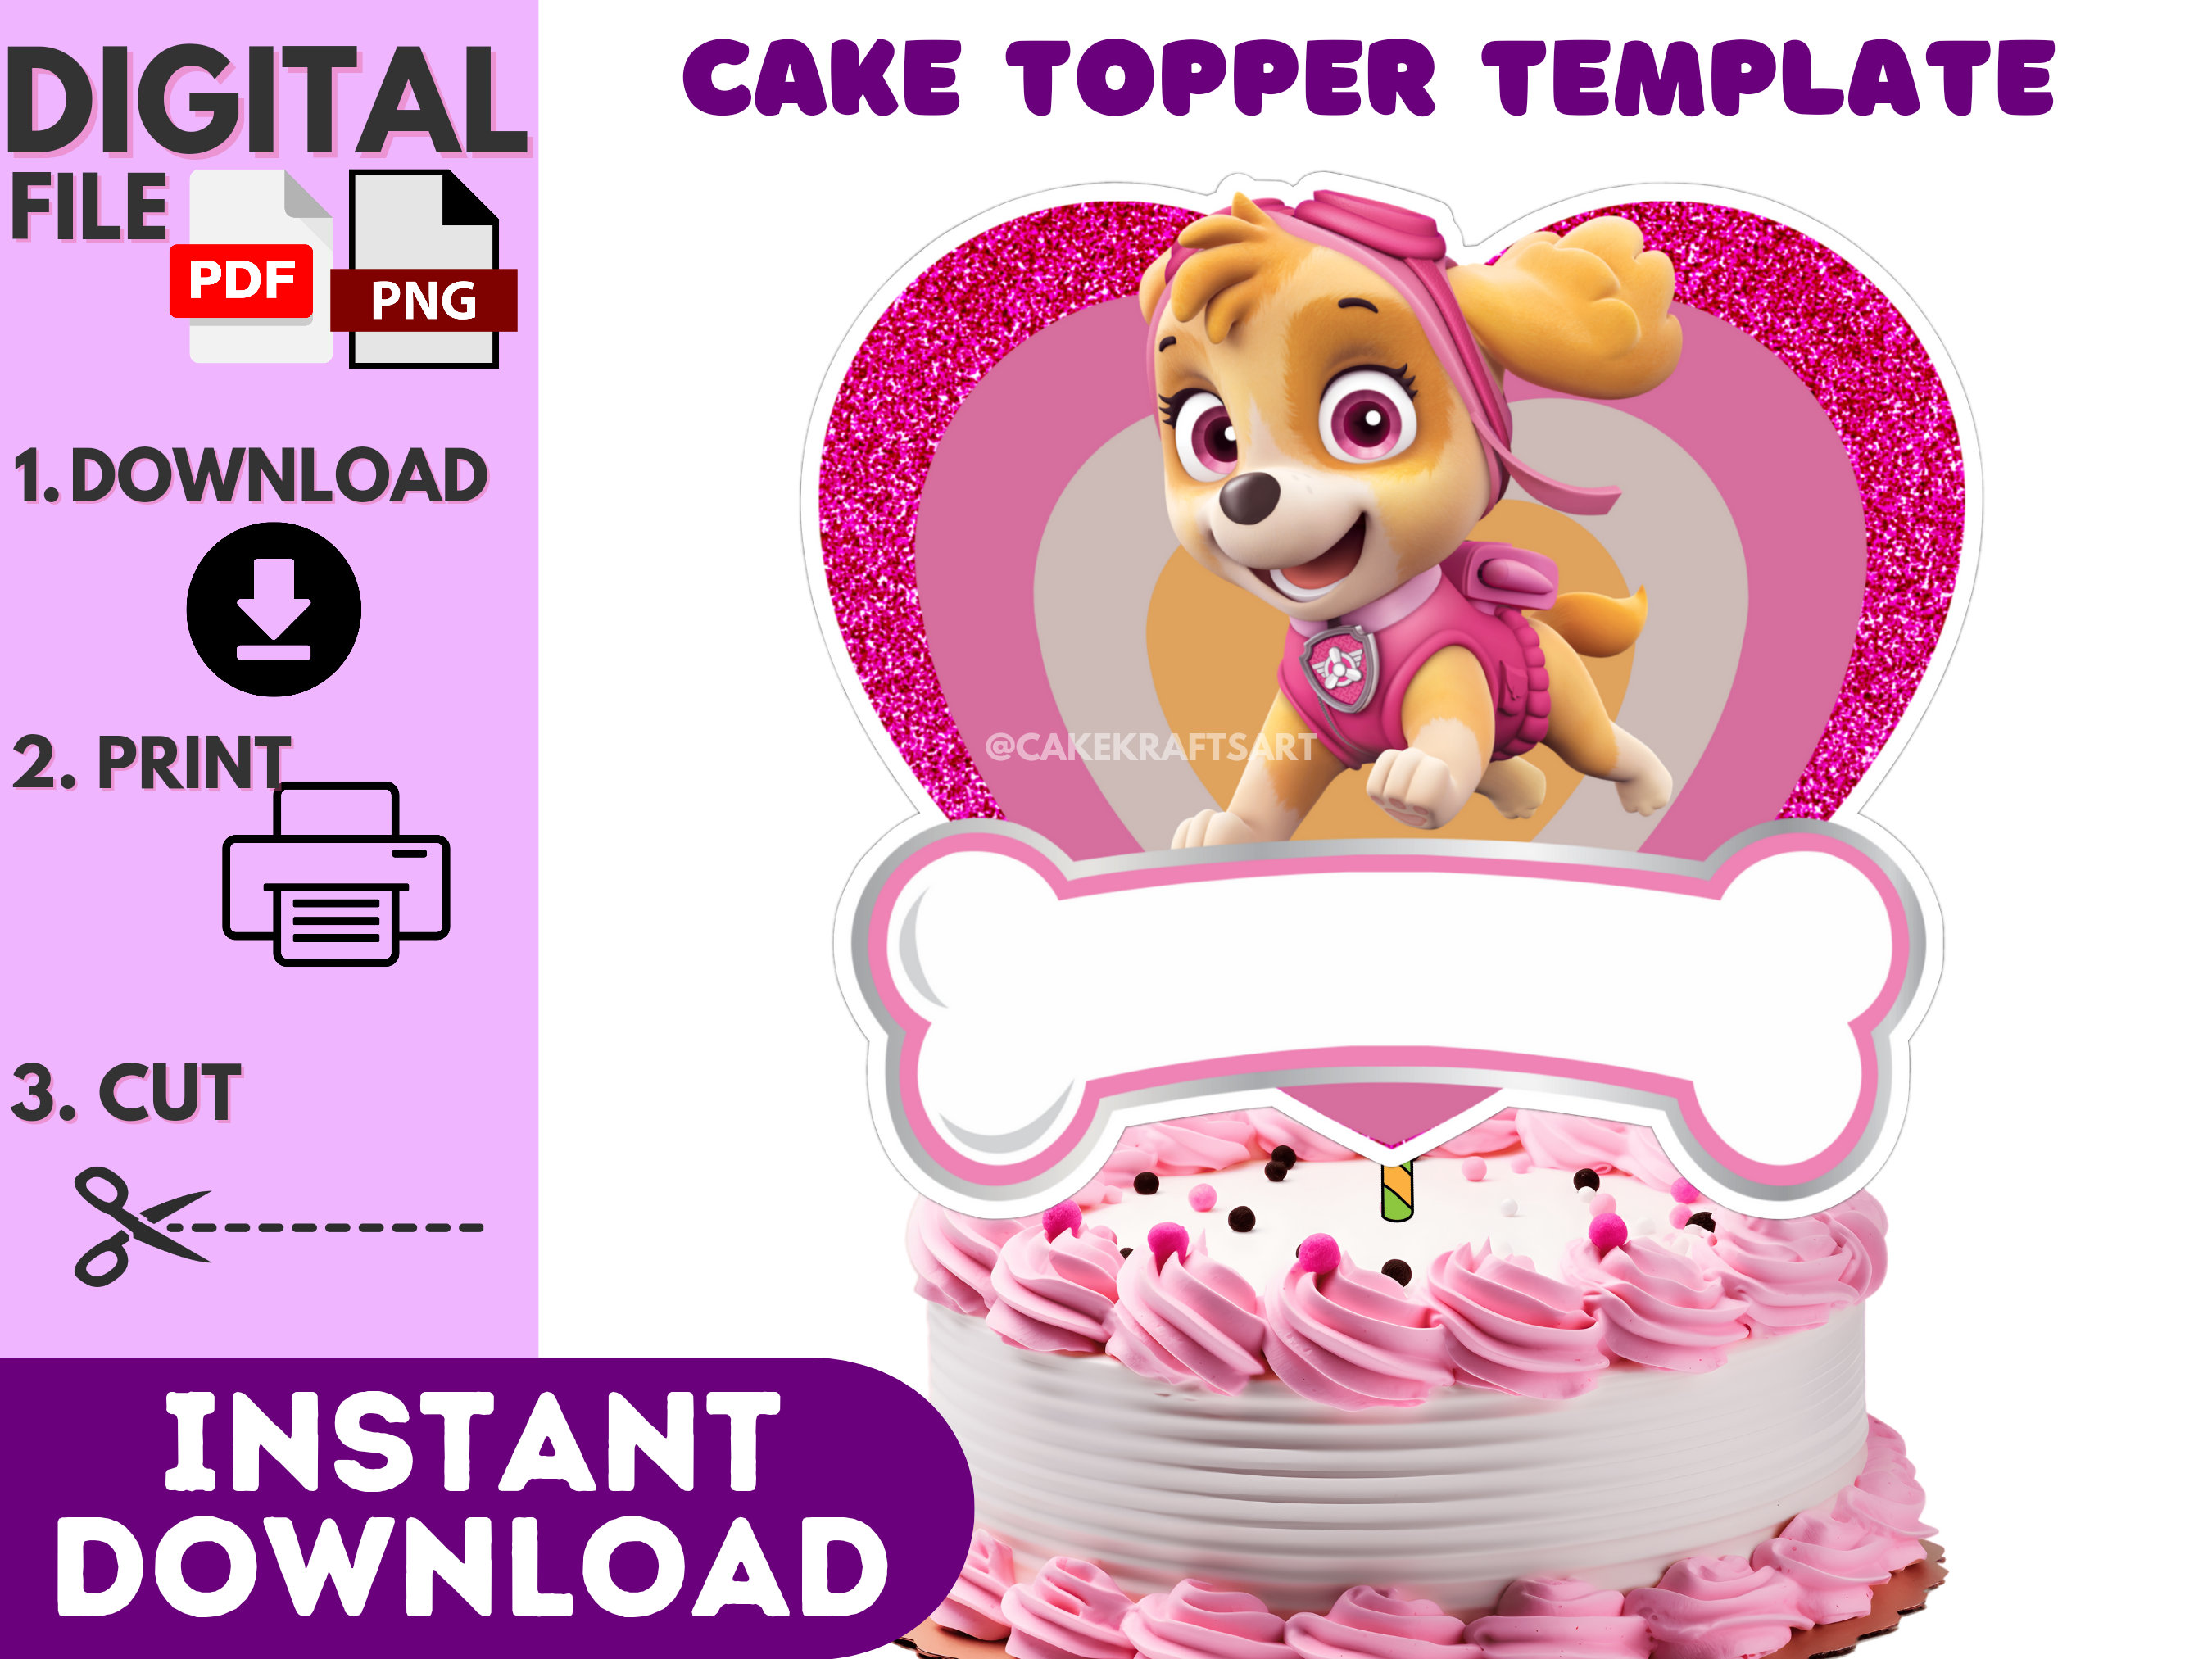 Instant Download Digital Cake Topper Template customizable Add Name and ...